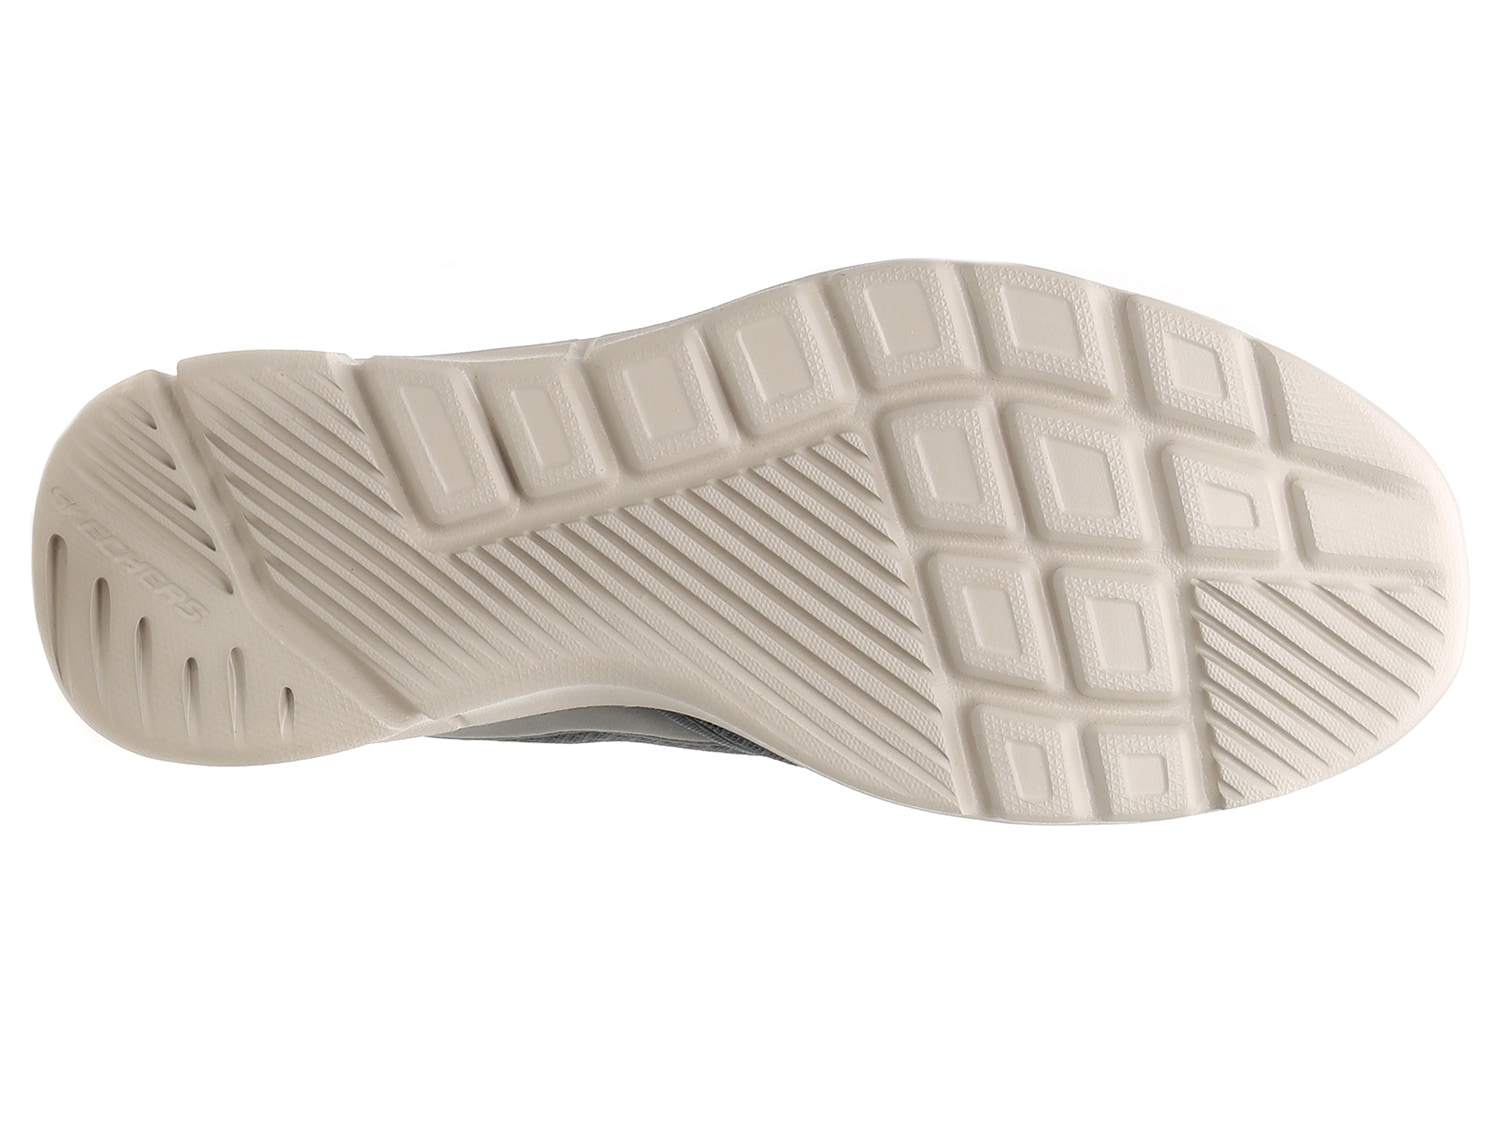 skechers relaxed fit equalizer 3.0 bluegate